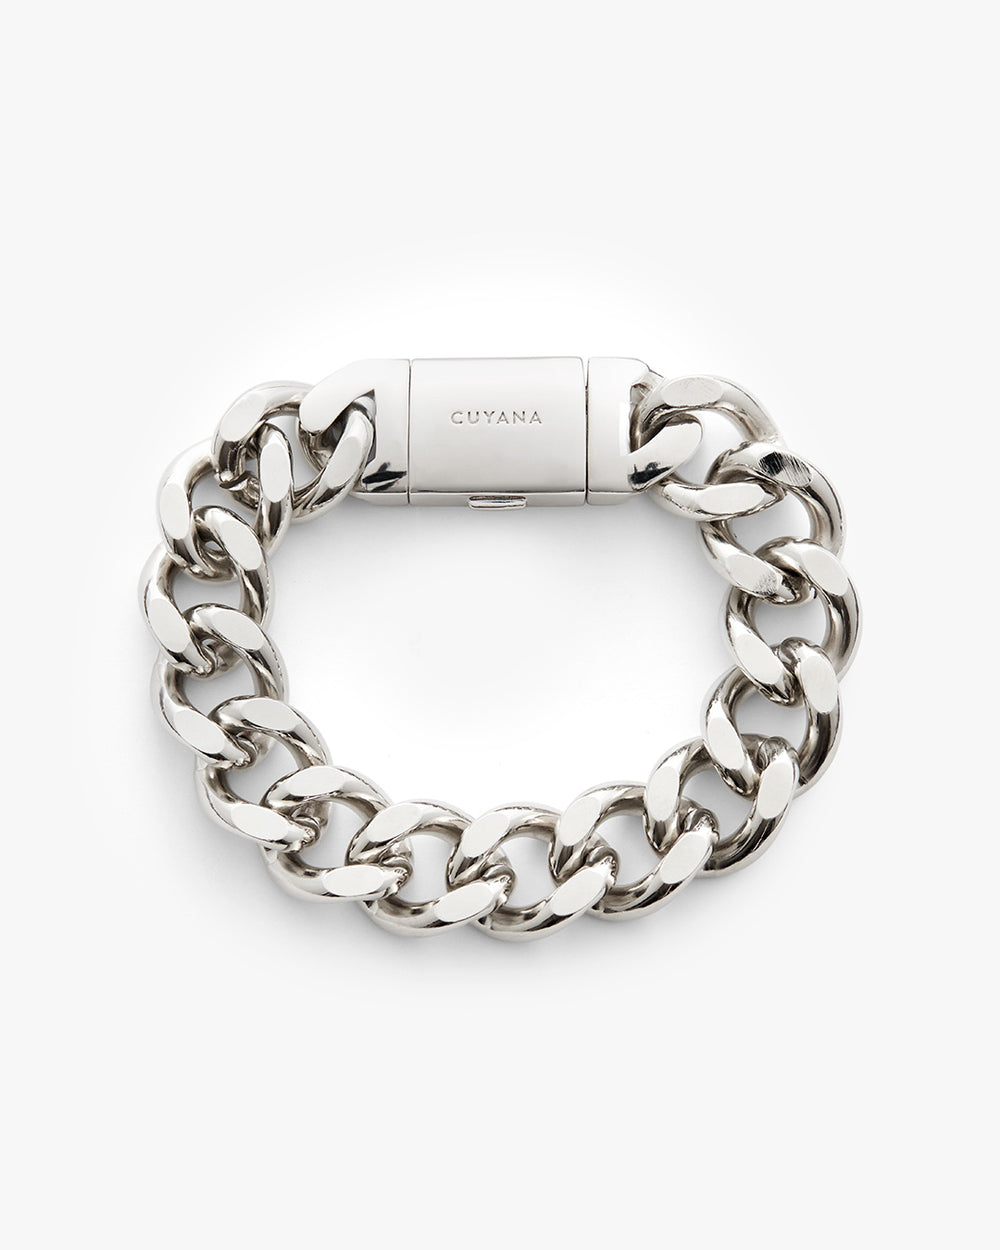 Metal bracelet with chunky links and a clasp closure